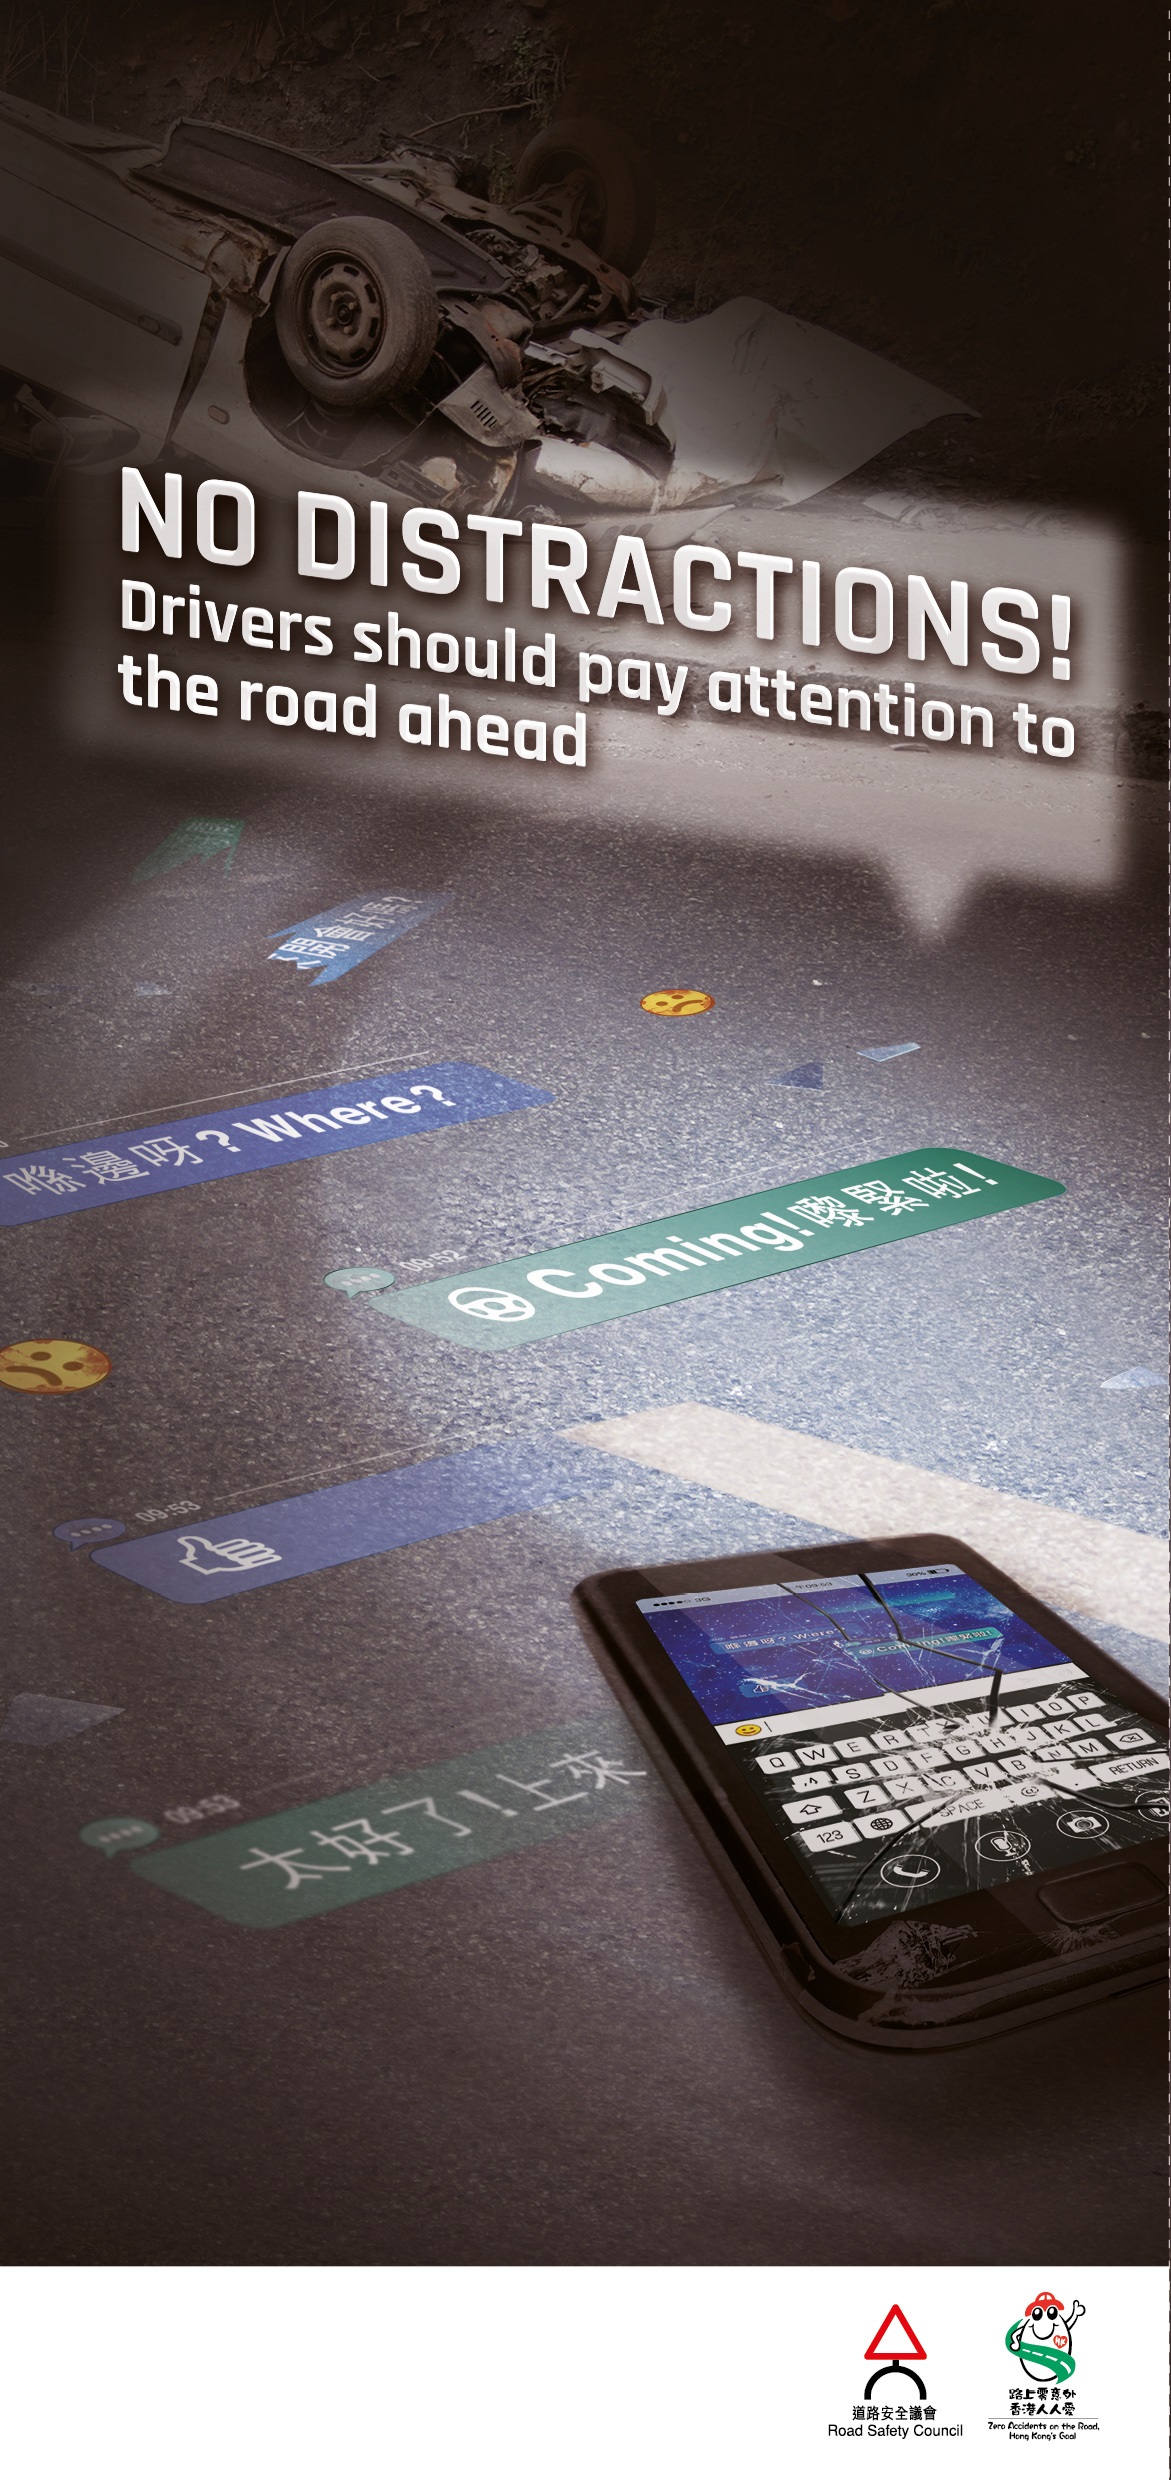 No Distractions! Drivers should pay attention to the road ahead